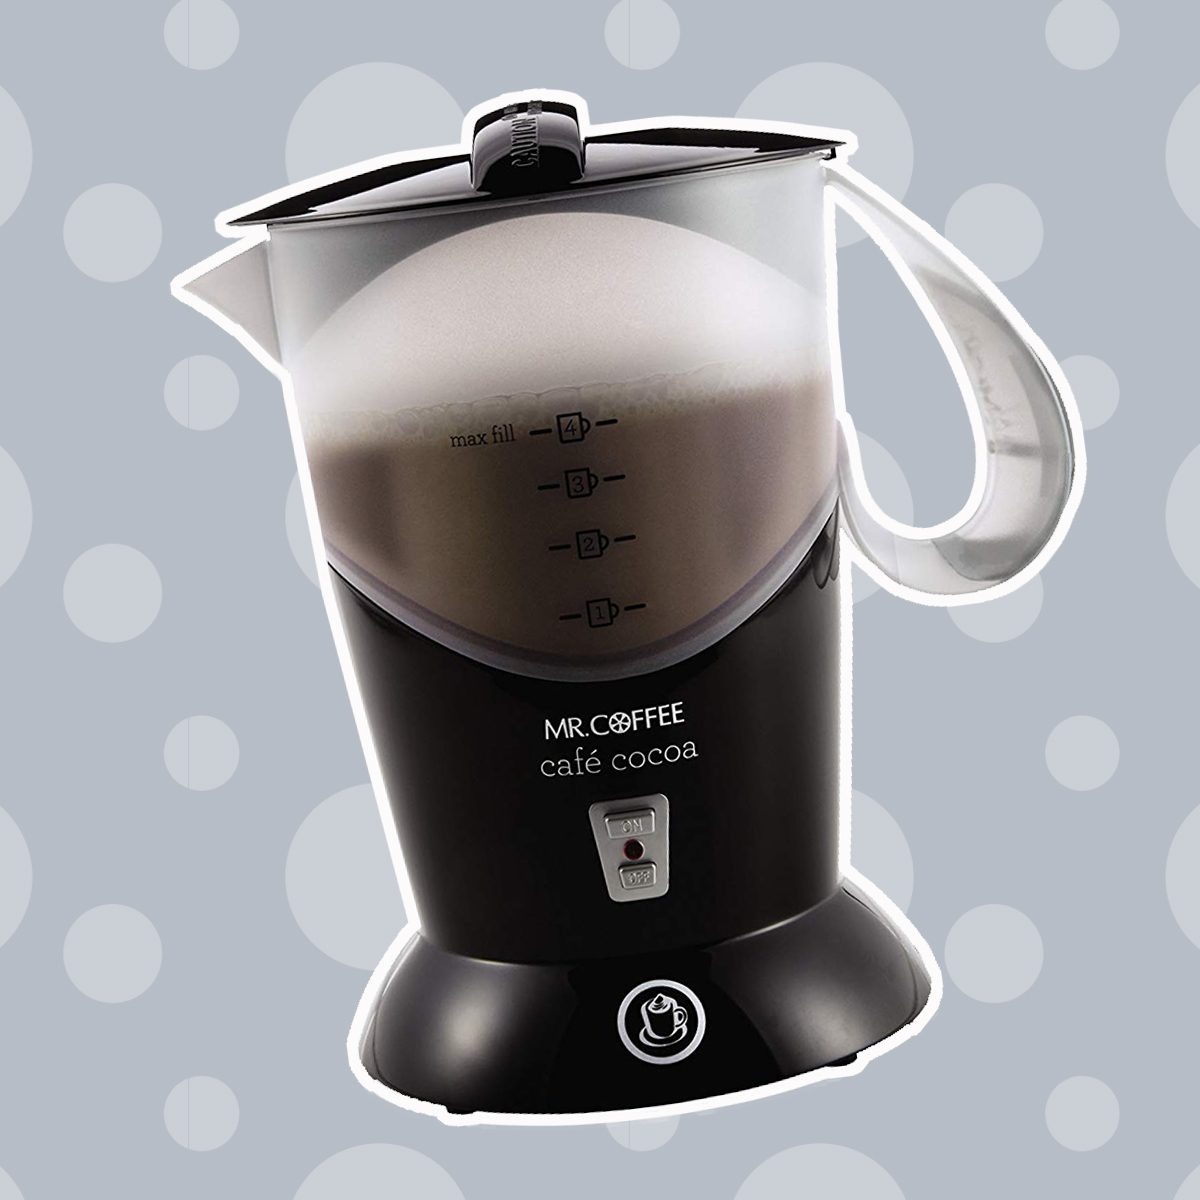 10 Best Hot Chocolate Makers